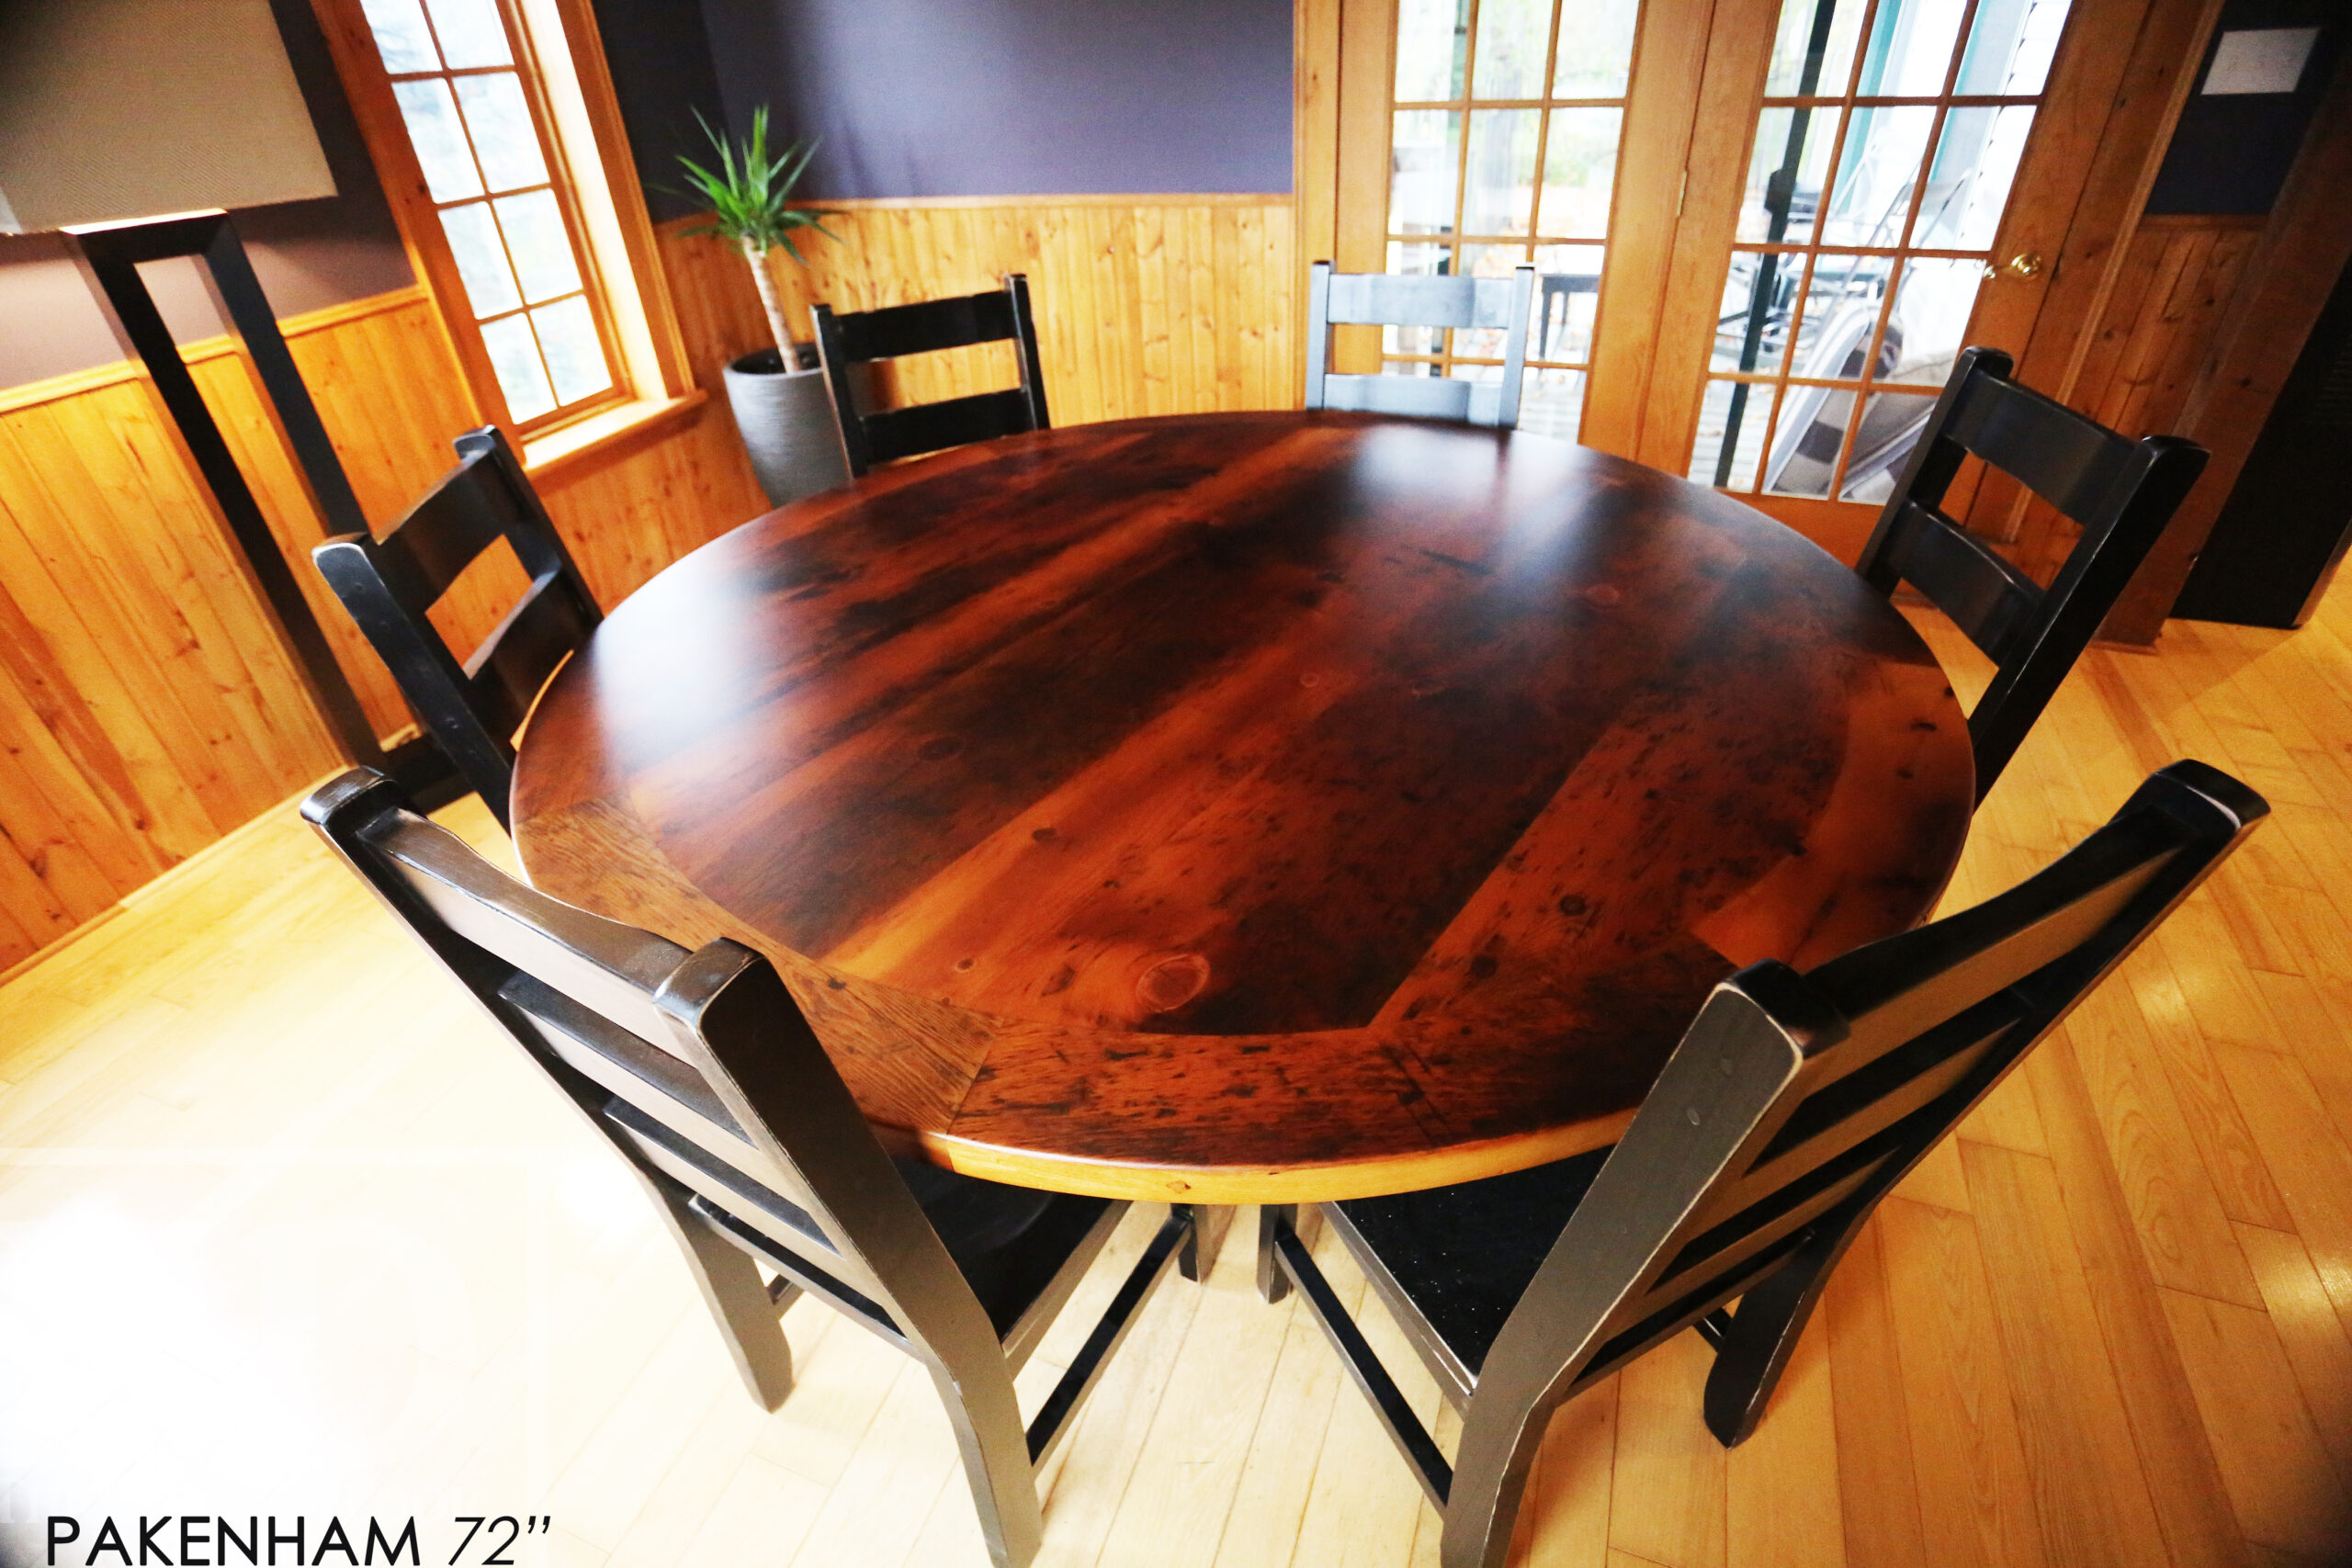 72" Round Ontario Barnwood Table we made for a Pakenham, Ontario Home - Reclaimed cedar hydro pole base - Old Growth Hemlock Threshing Floor Construction - Original Distressing & Character & Edges Maintained - Premium epoxy + matte polyurethane finish - 6 Ladder Back Chairs / Wormy Maple / Custom finished / Polyurethane clearcoat finish - www.table.ca